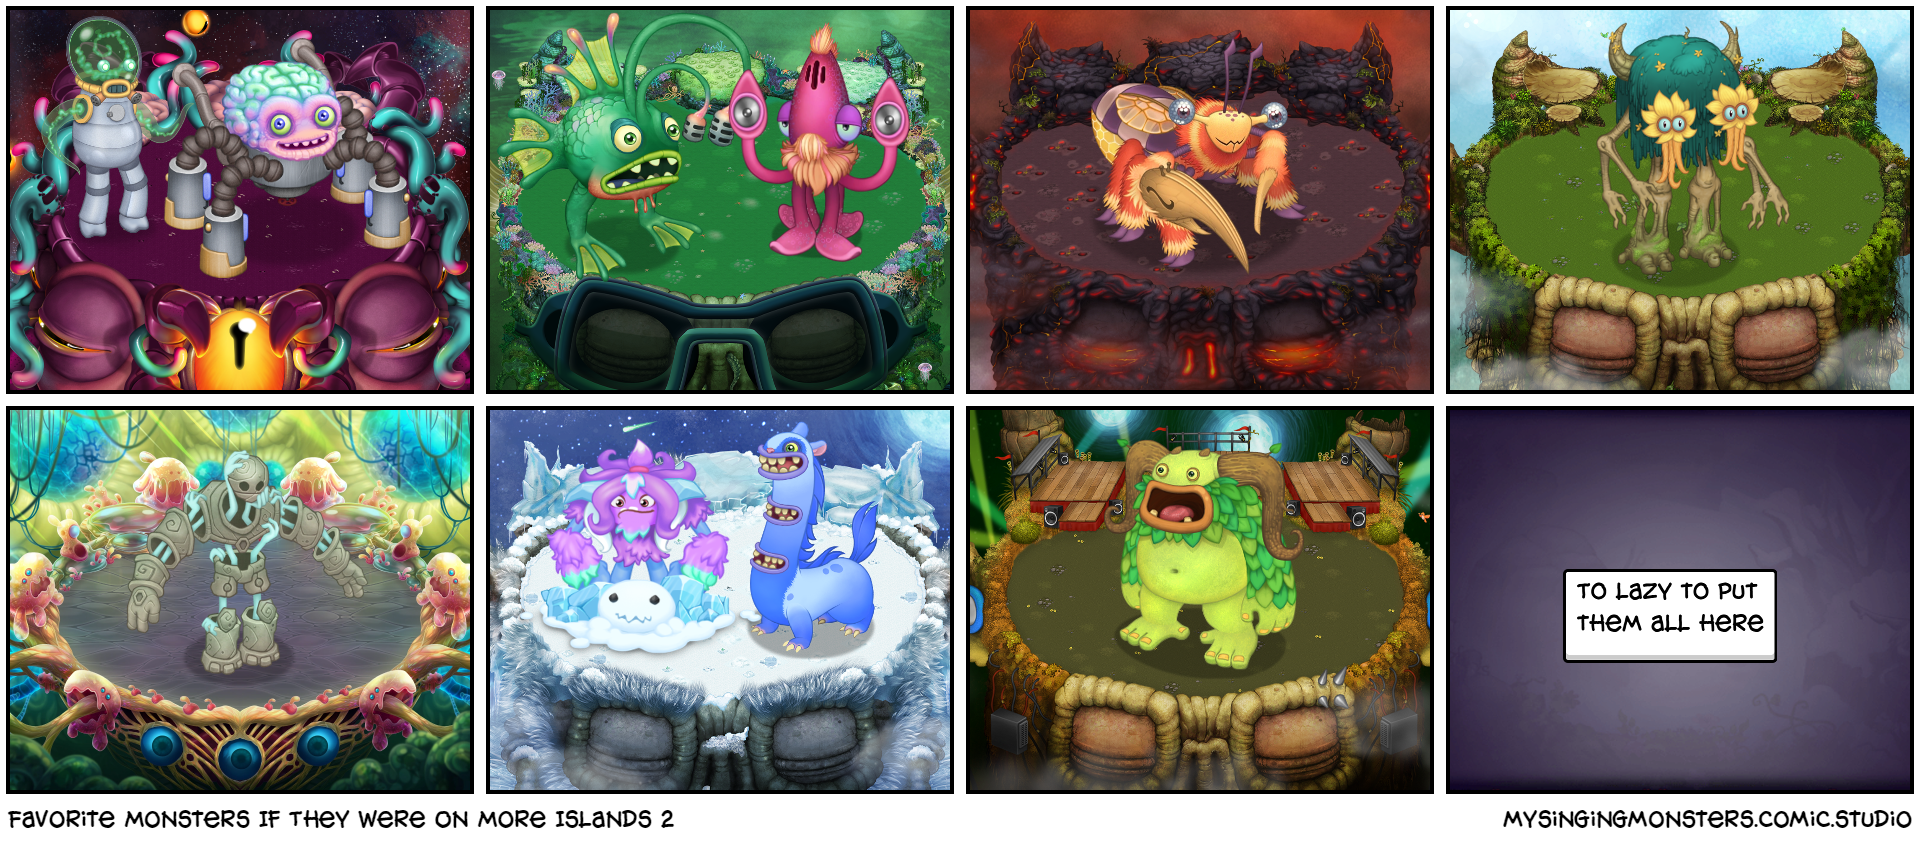 Favorite Monsters If They Were On More Islands 2